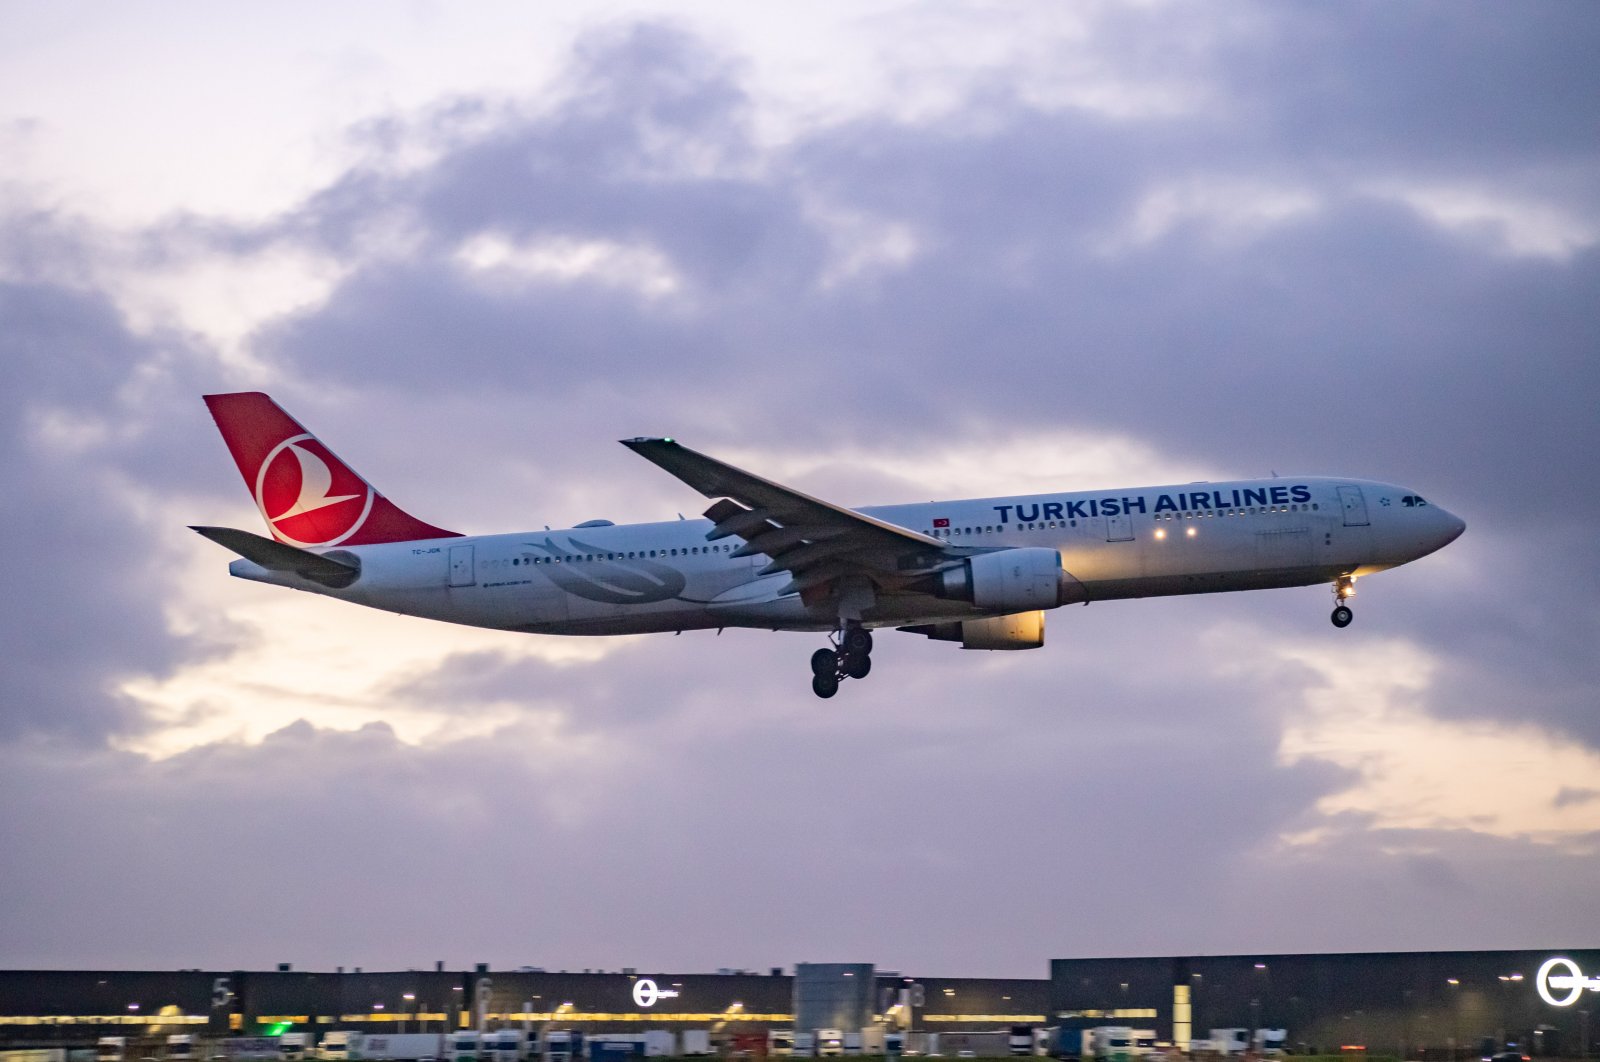 A Turkish Airlines Airbus A330 wide-body aircraft is seen landing at Amsterdam Schiphol Airport, the Netherlands, Jan. 5, 2022. (Reuters Photo)